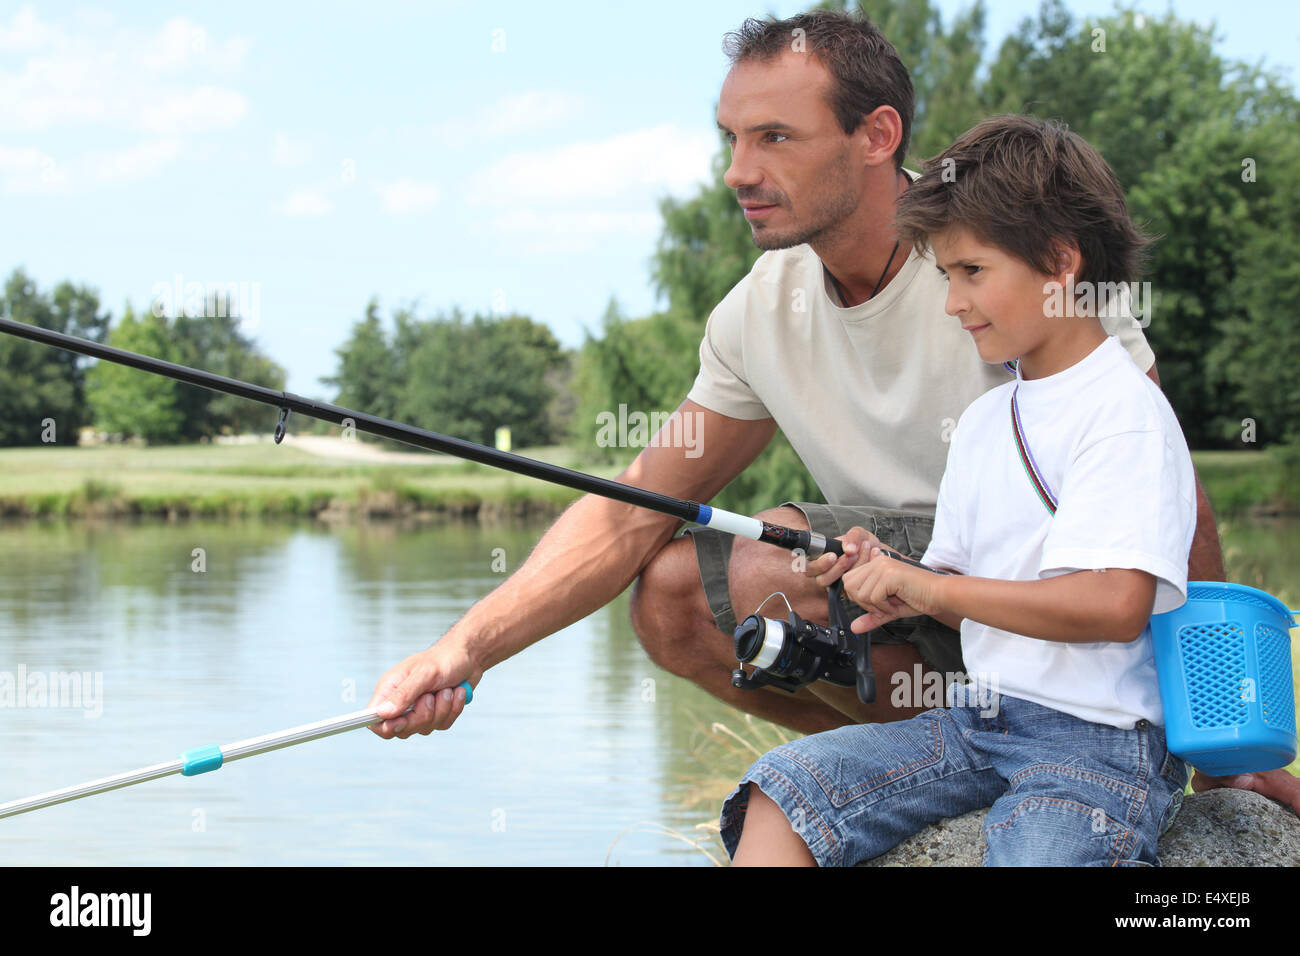 Father and son fishing together on dock - Stock Image - F004/1897